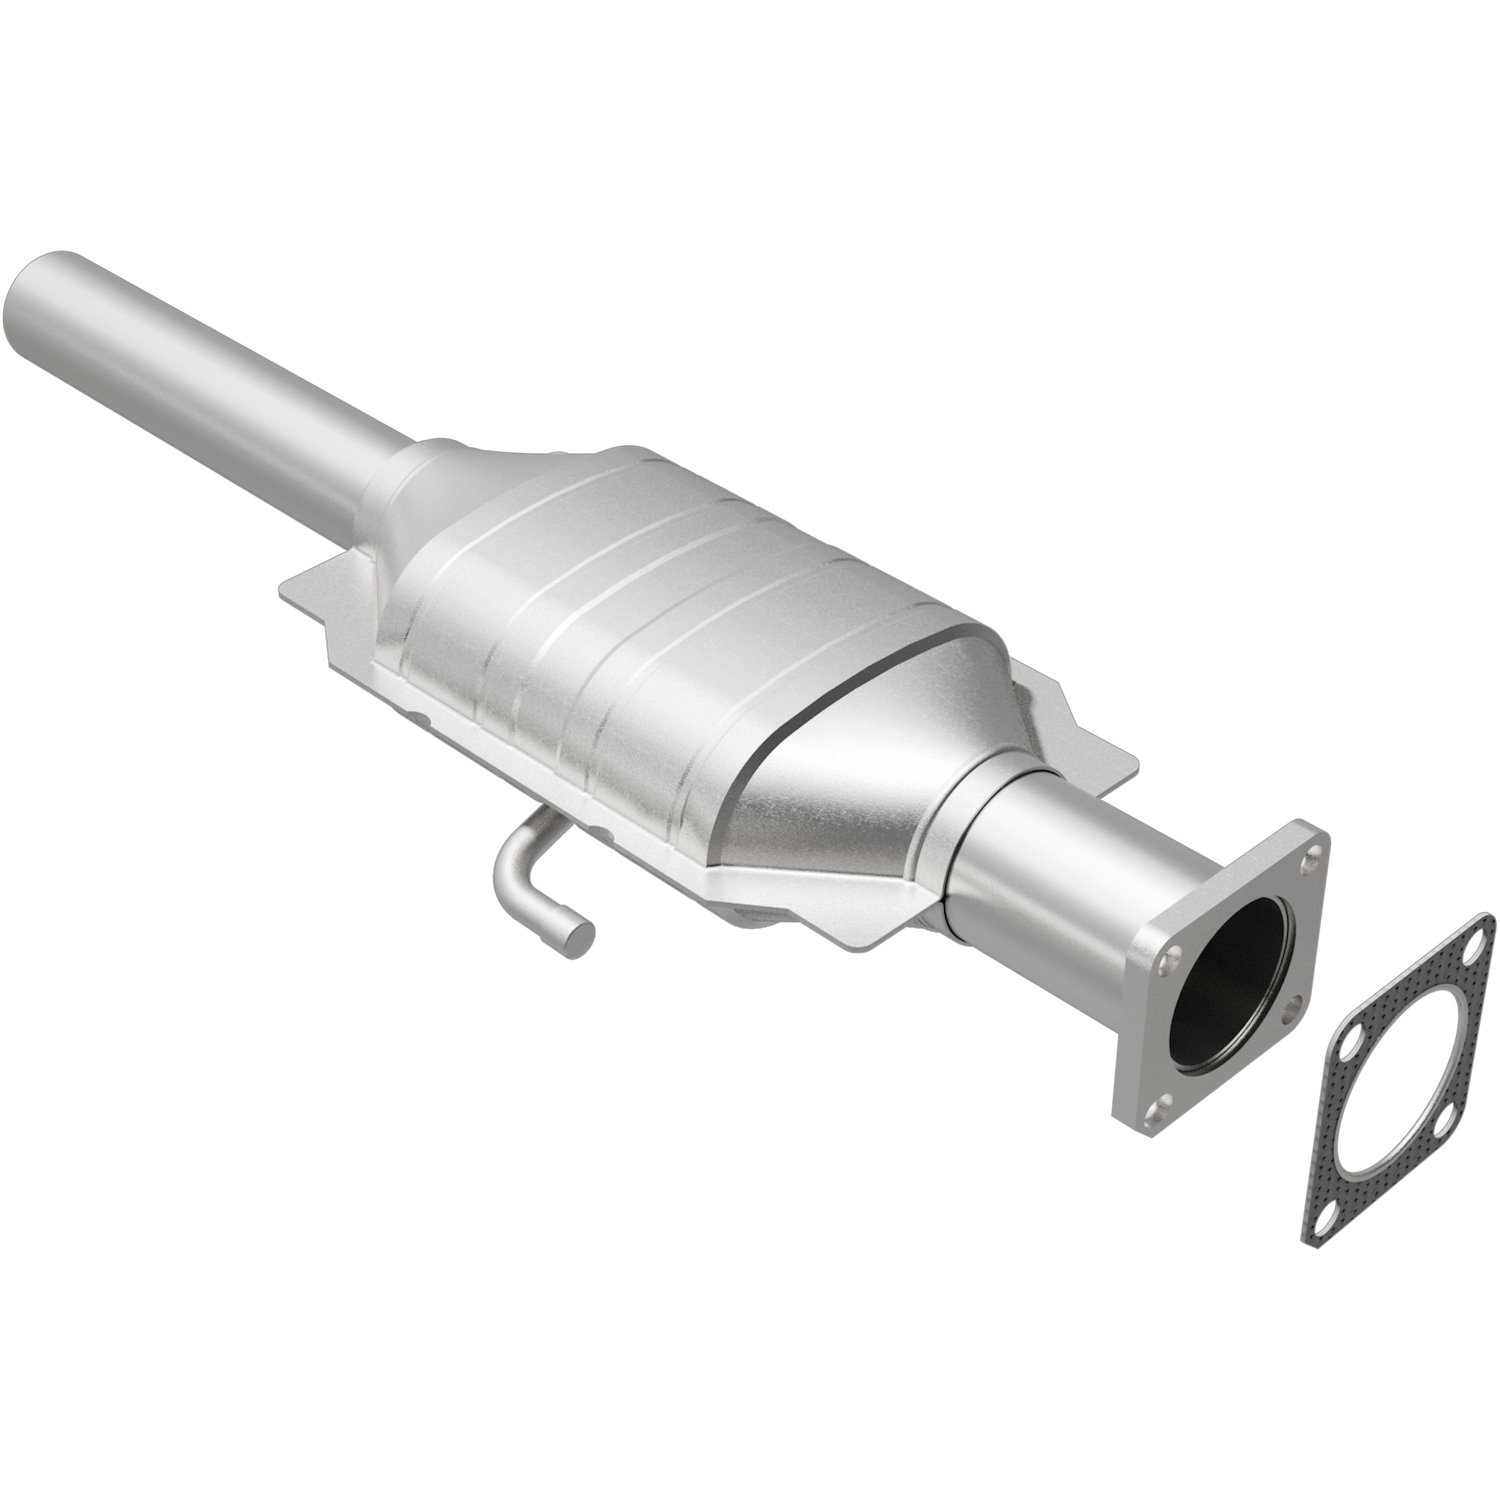 California Grade CARB Compliant Direct-Fit Catalytic Converter 3391224